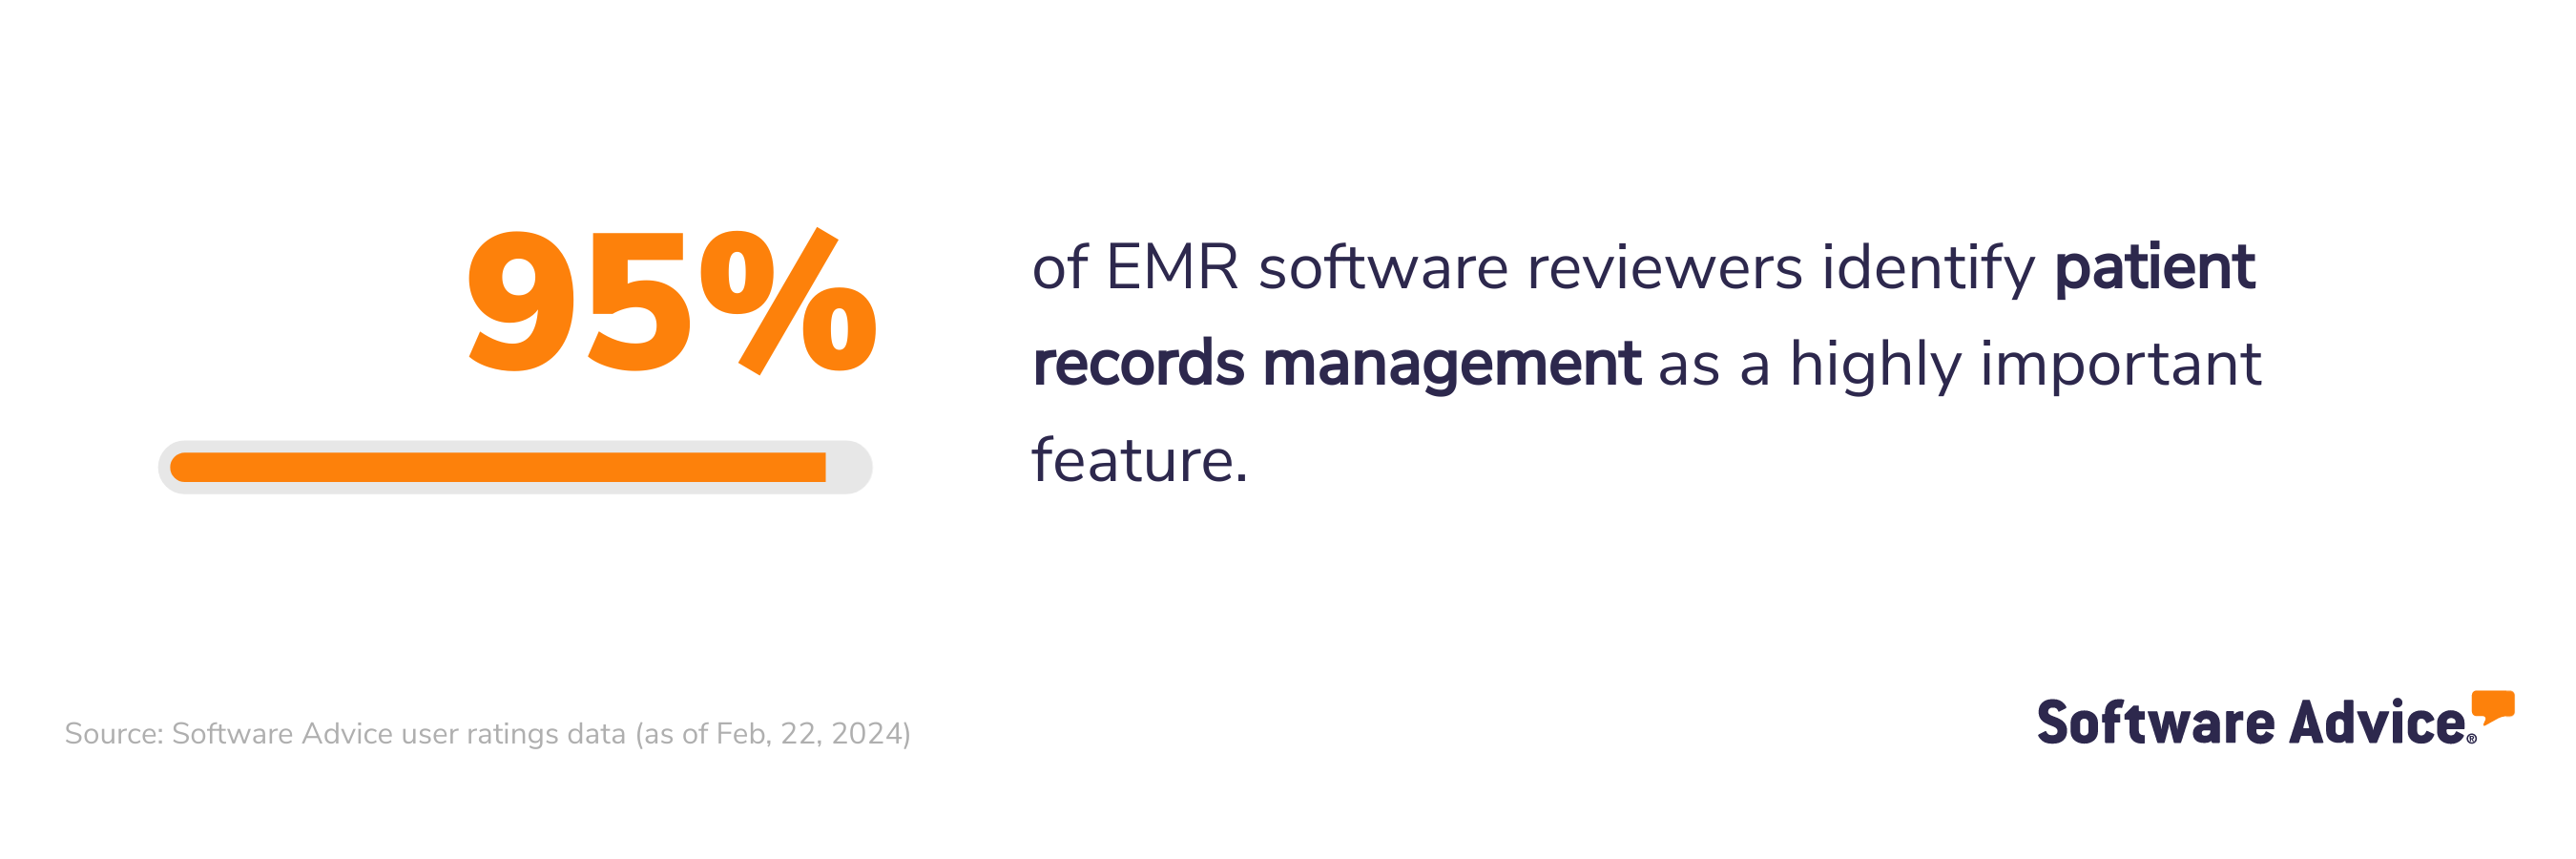 95% of EMR software reviews identify patient records management as a highly important feature.